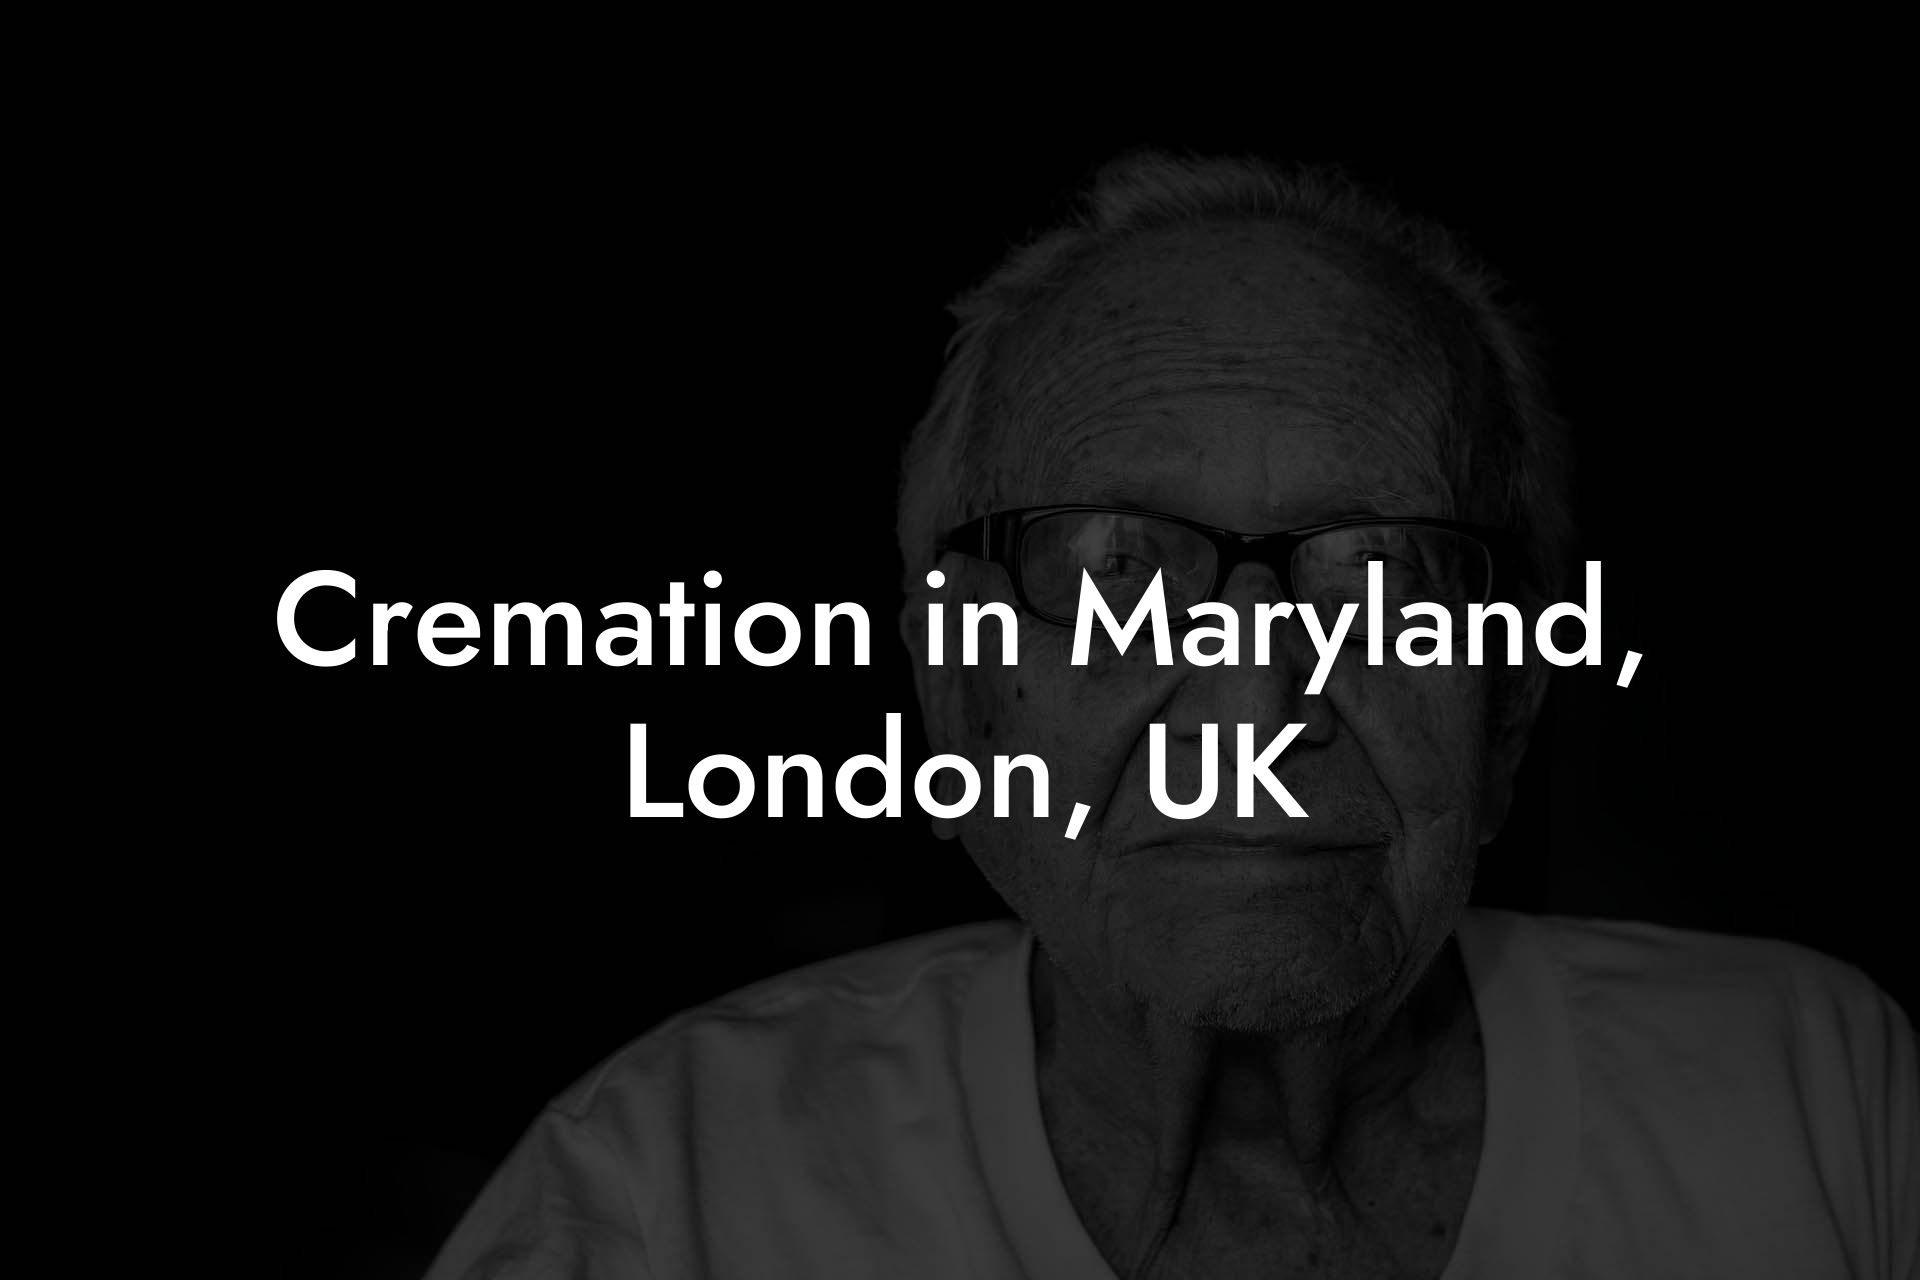 Cremation in Maryland, London, UK